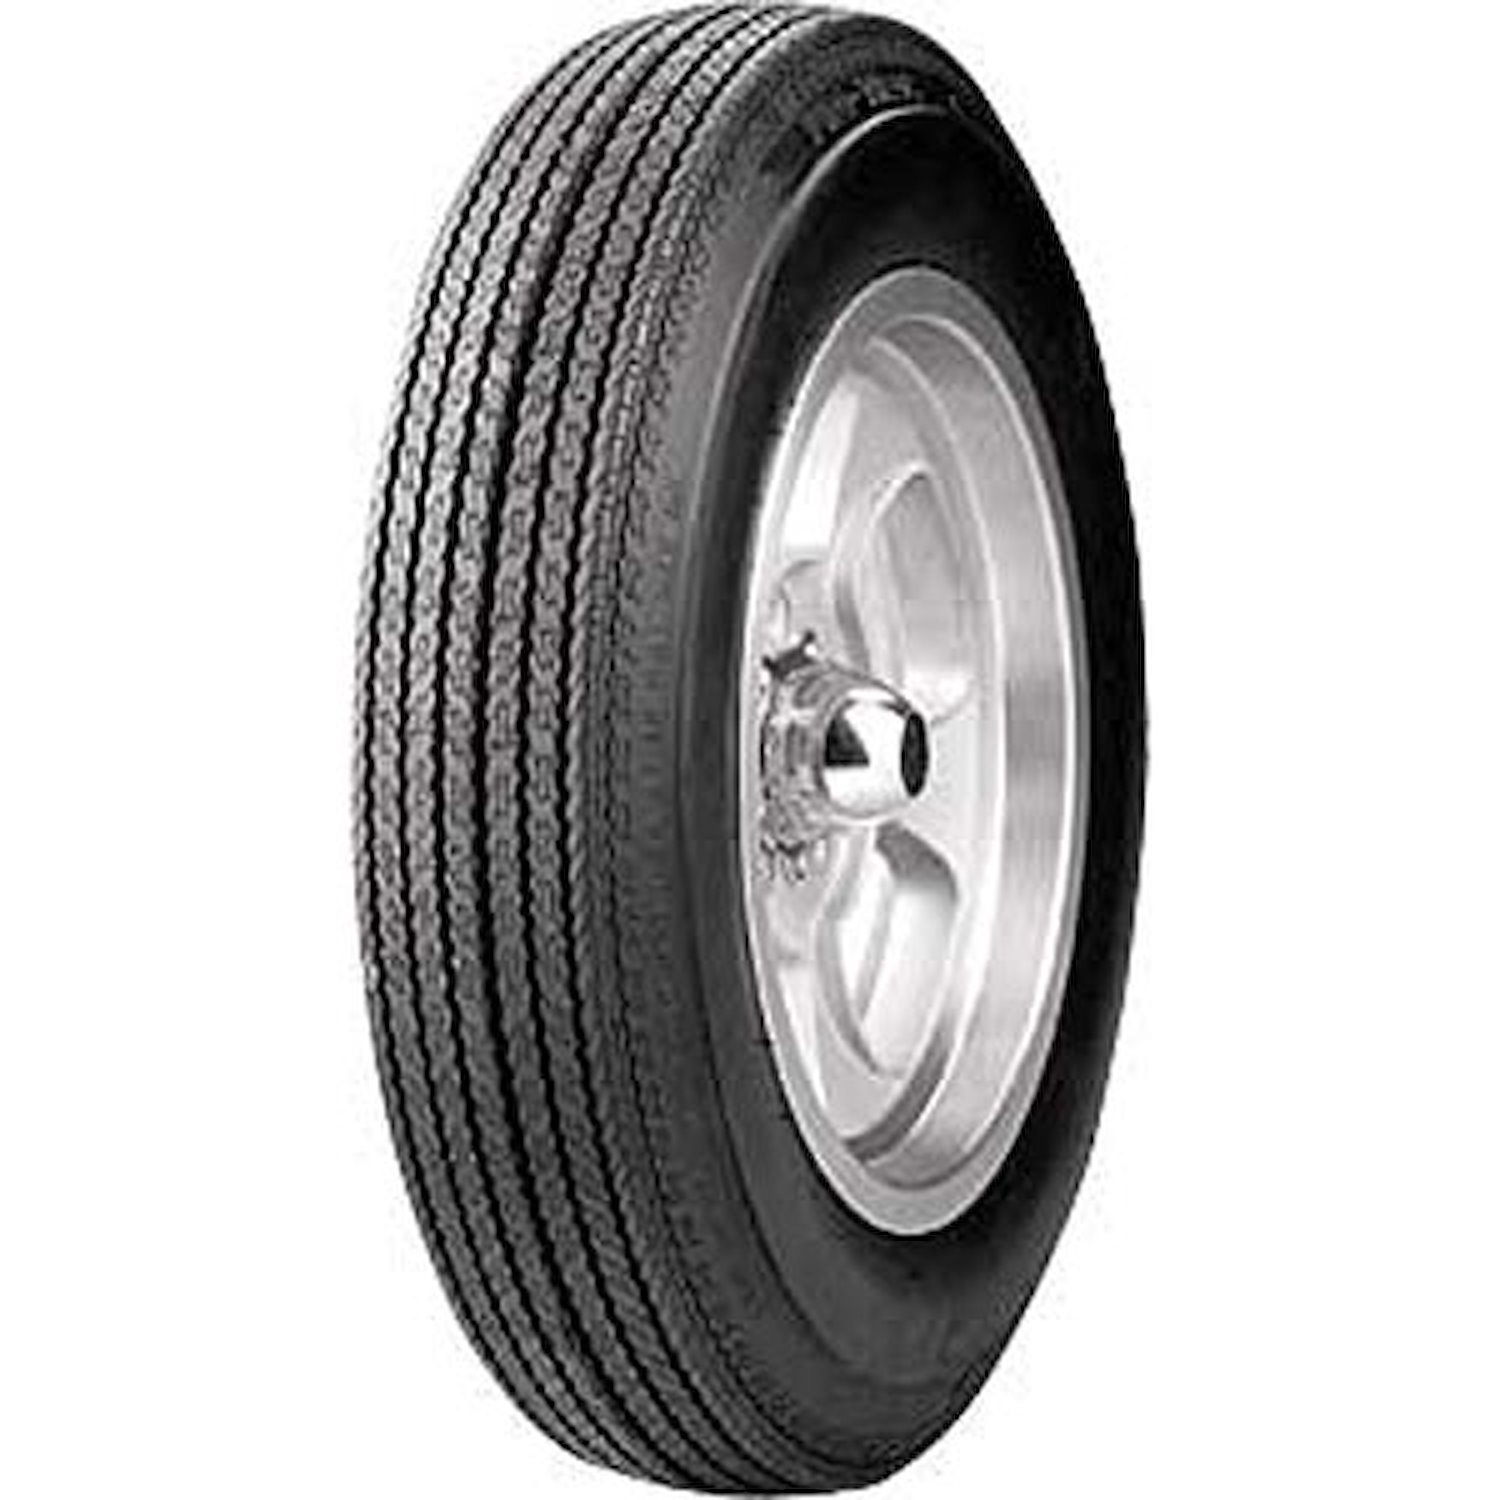 55515 Front Pro-Trac Performance Tire 560-15